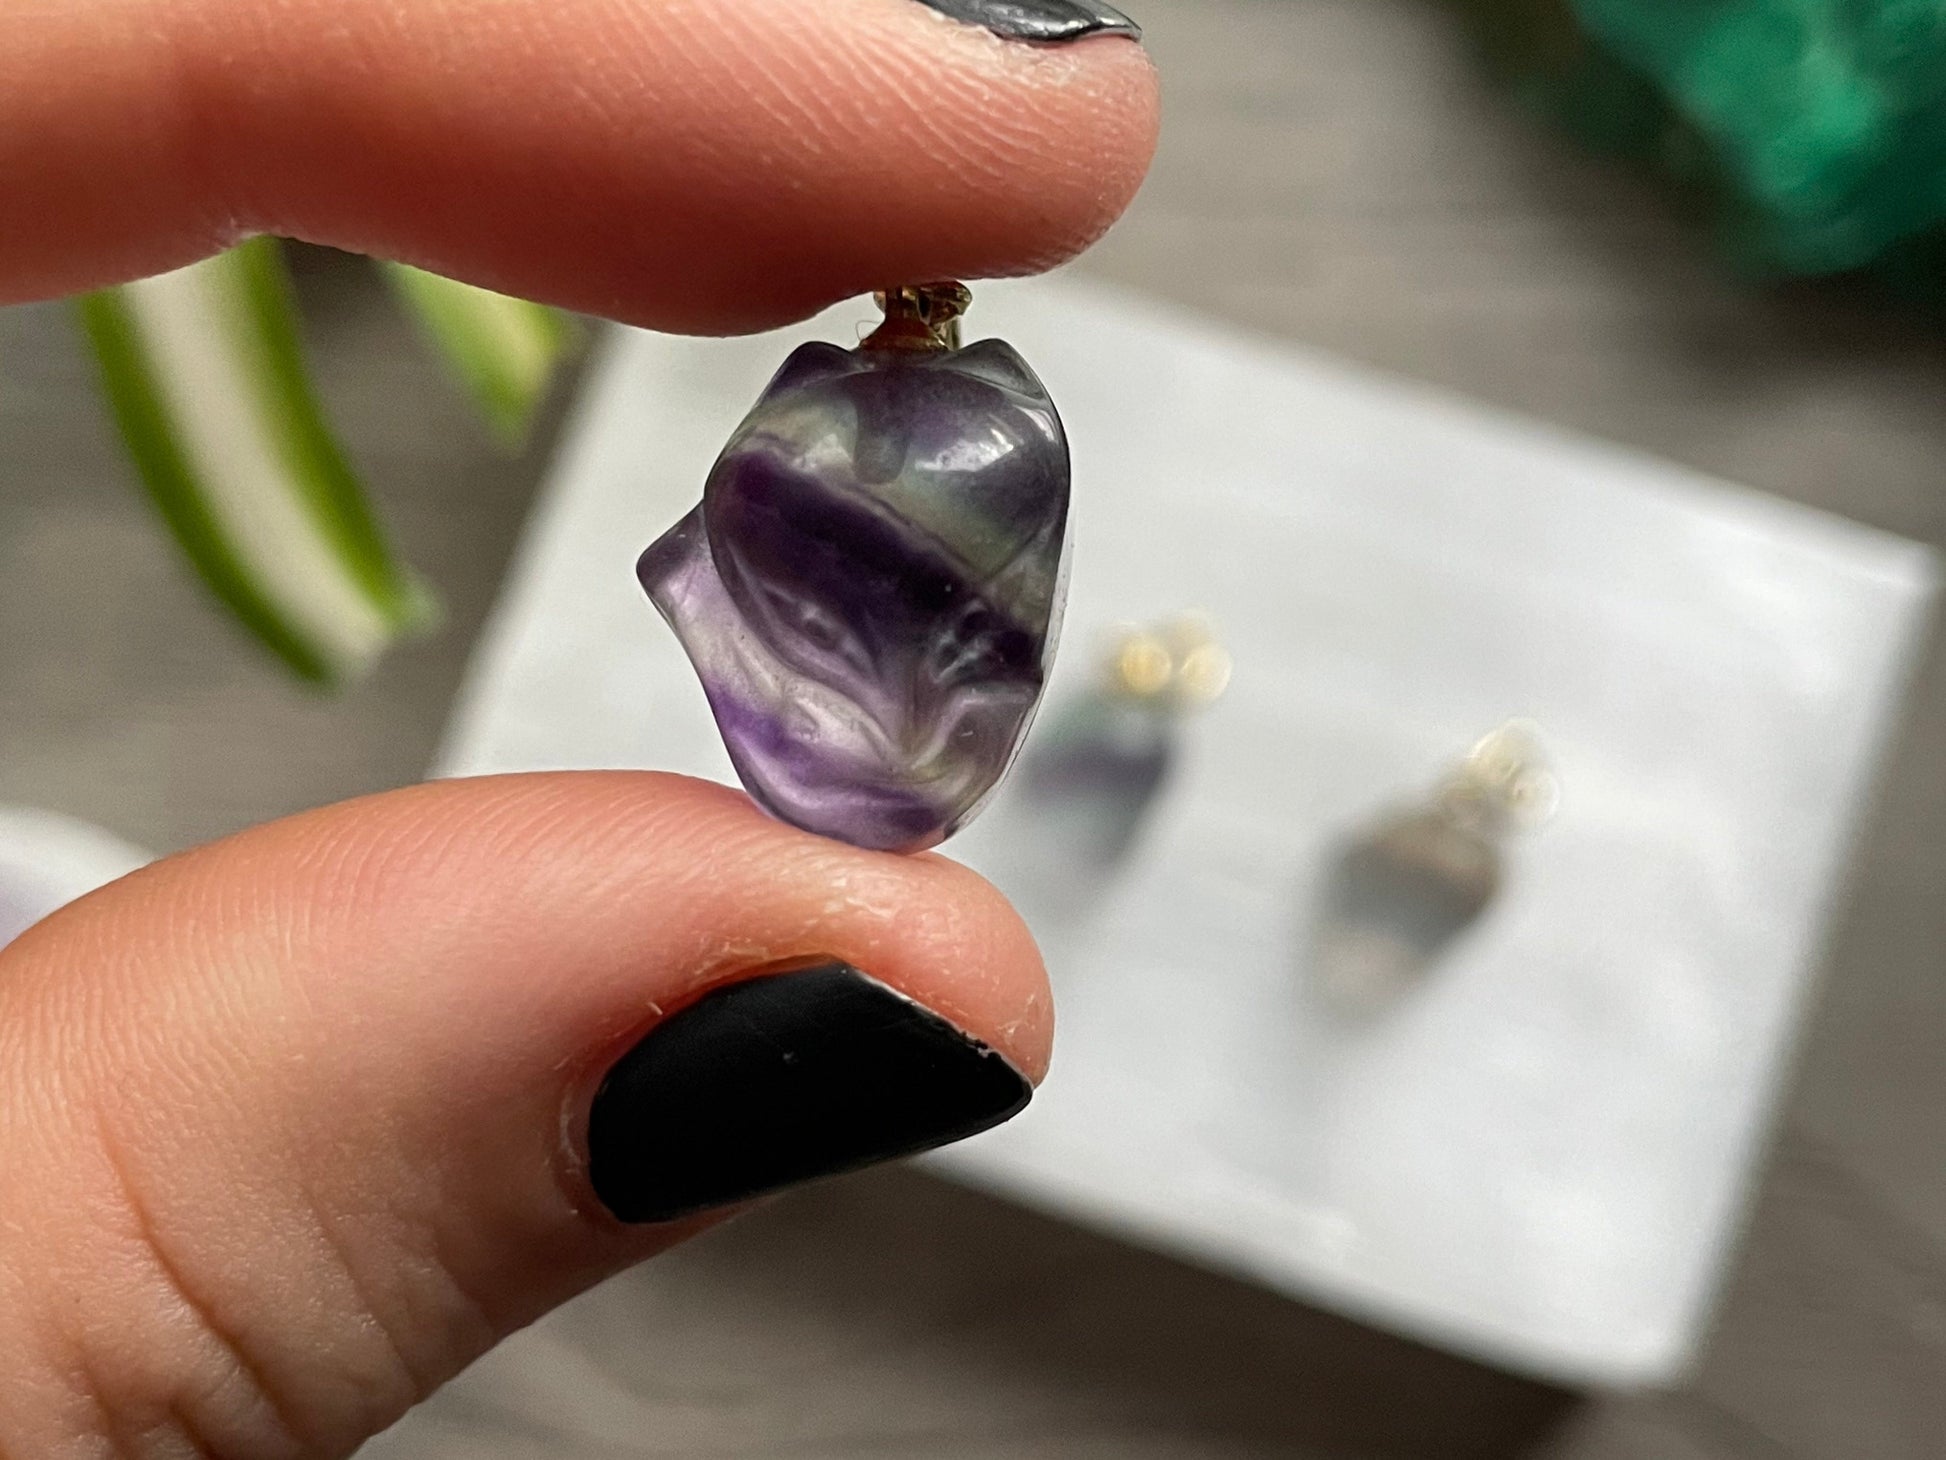 Pictured is a rainbow fluorite charm pendant in the shape of a cute fox.